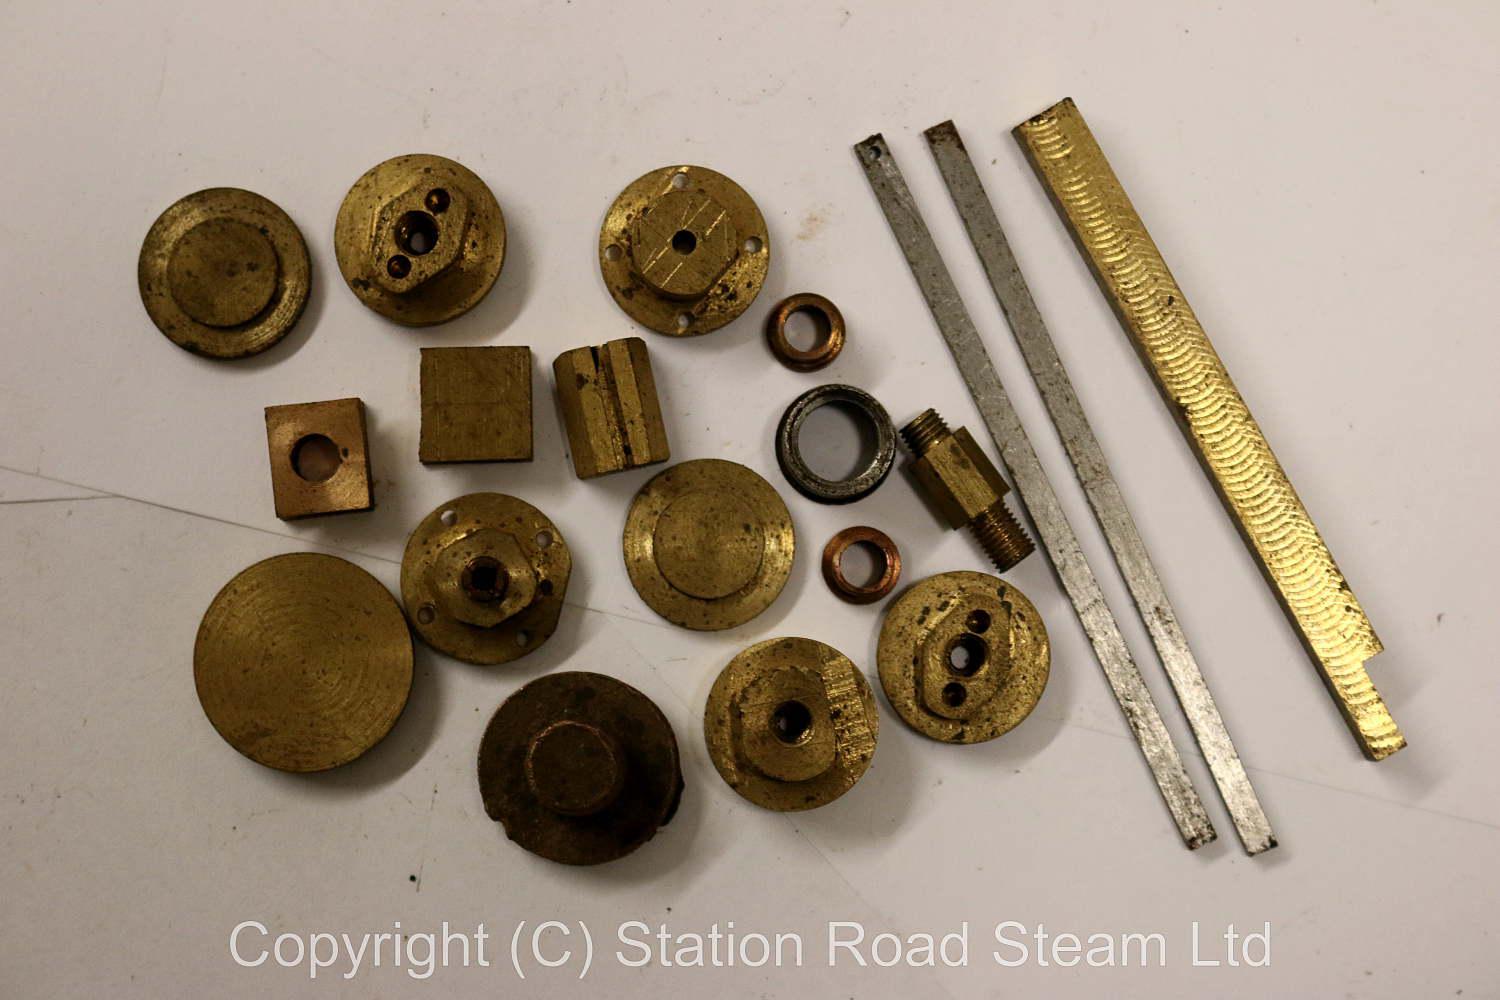 O-gauge parts and castings